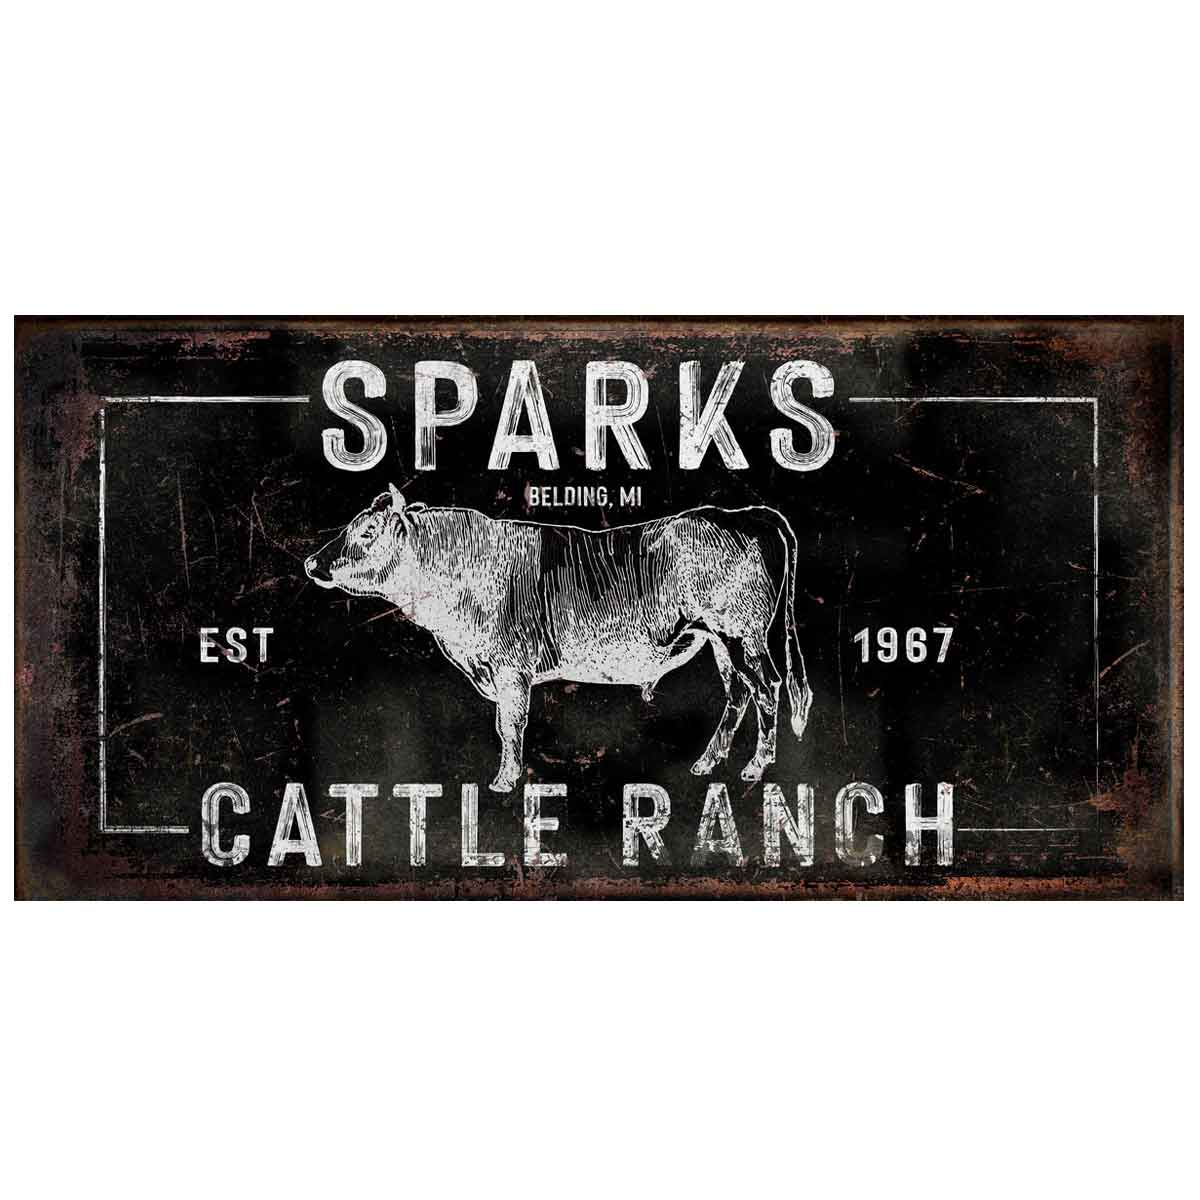 Cattle Ranch Sign with distressed black background with large Beef cow in foreground, with words: "Family Name" city and state, est. date, Cattle Ranch in white lettering.